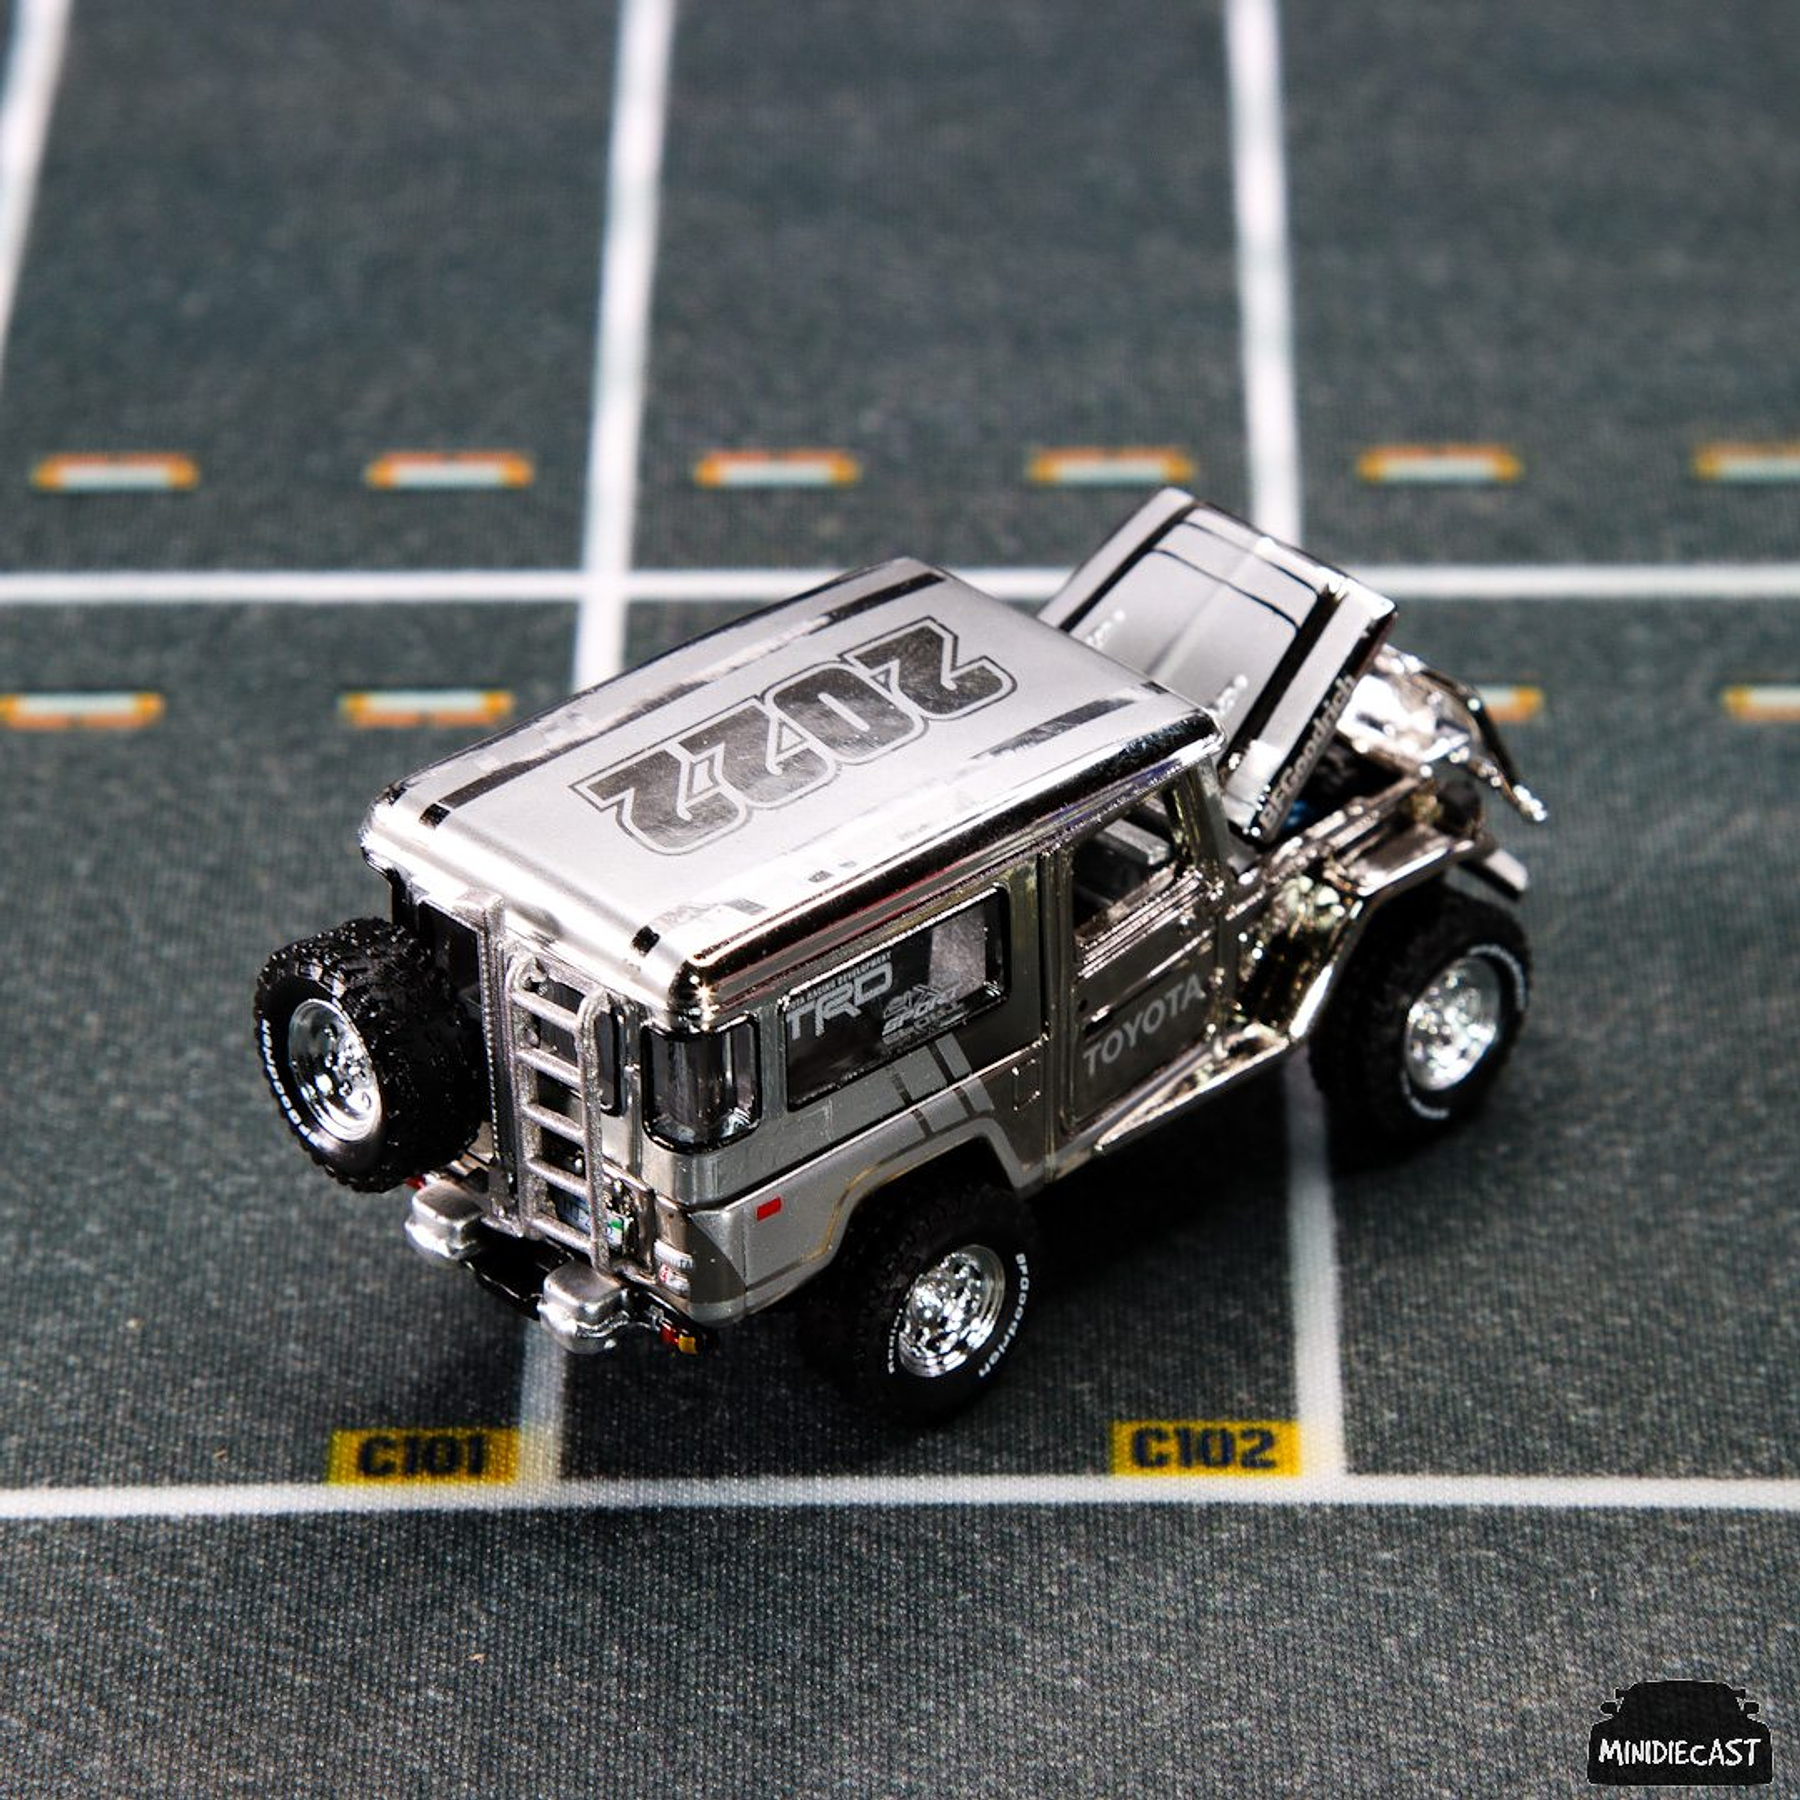 Johnny Lightning 1:64 1980 Toyota Land Cruiser “Forty ” Series CHROME With Showcase Limited 3,600 Mijo Exclusives